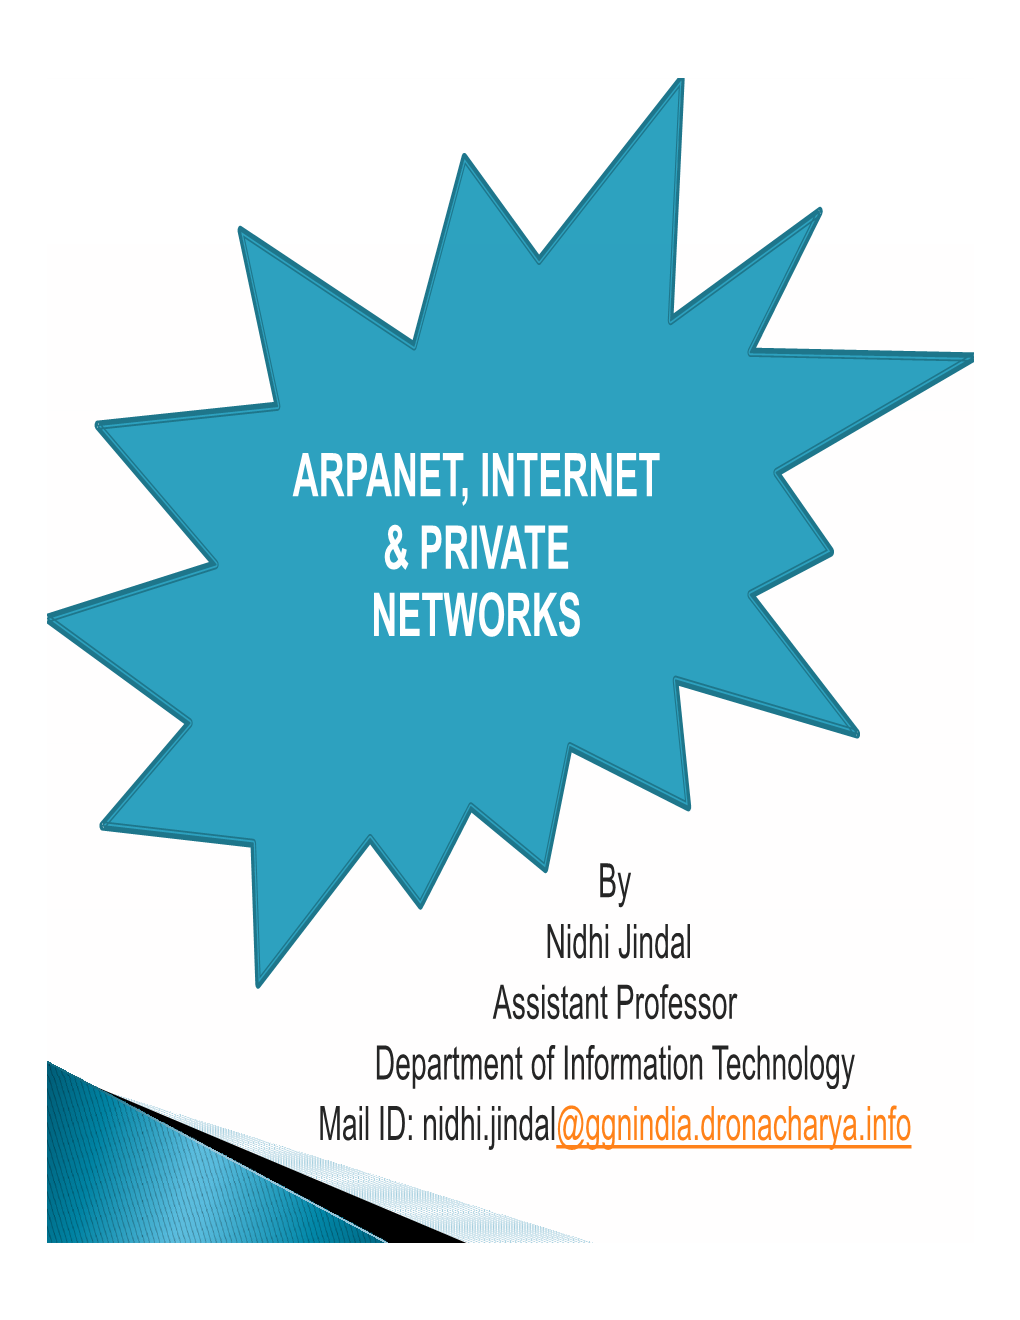 Arpanet, Internet & Private Networks